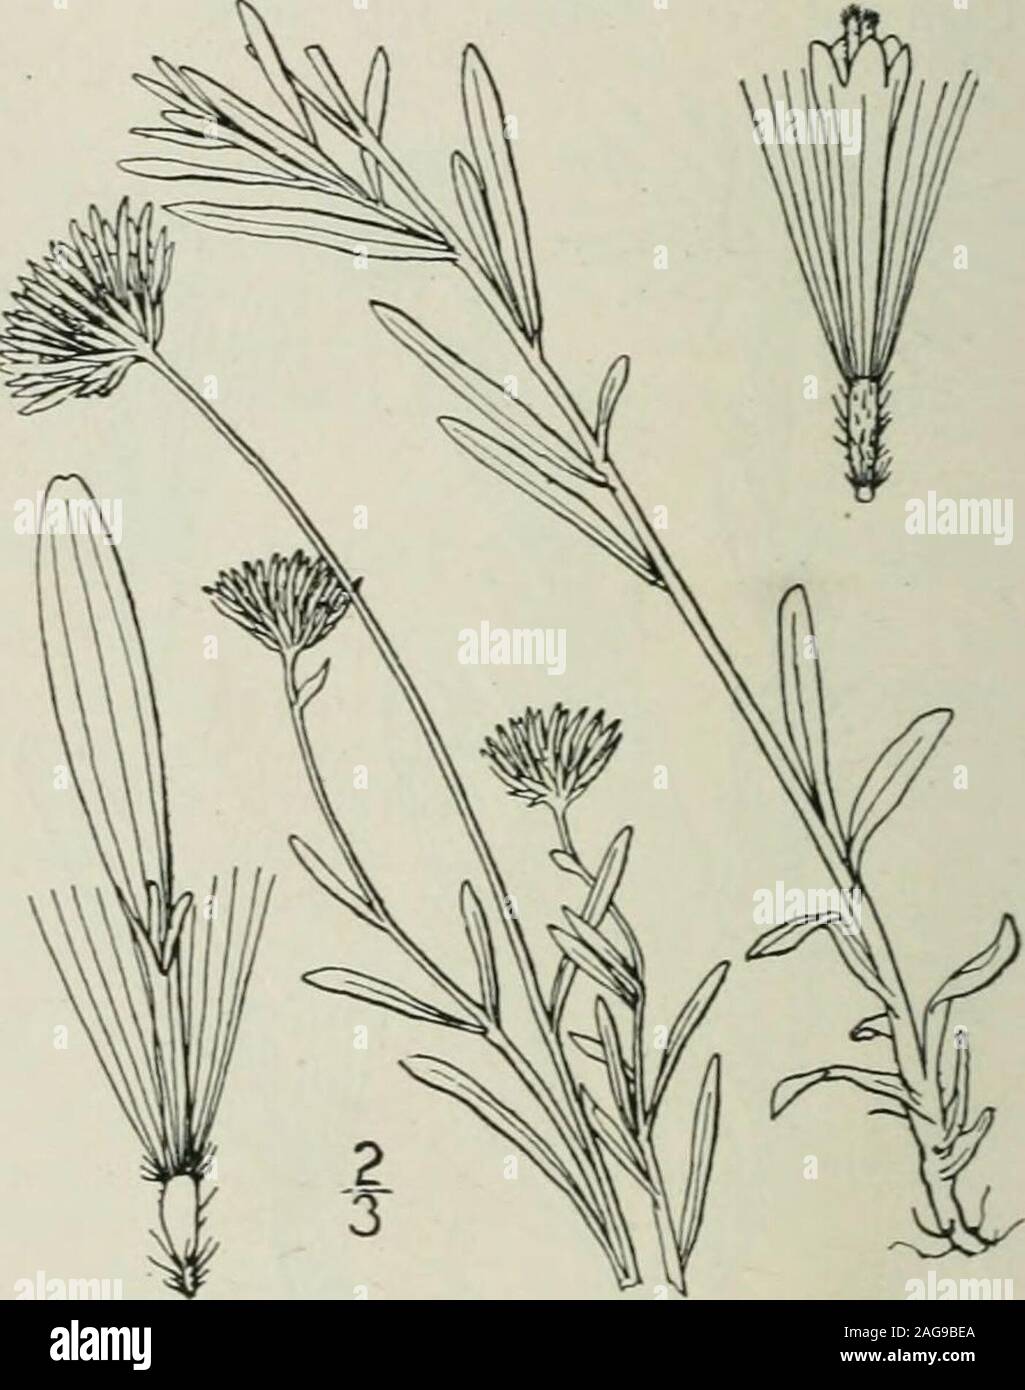 . An illustrated flora of the northern United States, Canada and the British possessions : from Newfoundland to the parallel of the southern boundary of Virginia and from the Atlantic Ocean westward to the 102nd meridian. 8. Erigeron flagellaris A. Gray,ning Fleabane. Fig. 4368. Run- Erigeron flagellaris A. Gray, Mem. Am. Acad, (II)4: 68. 1849. Appressed-pubescent, sometimes densely so,perennial by decumbent rooting stems or sto-lons ; root slender; stem slender, branched,the branches elongated. Leaves entire, thebasal and lower ones spatulate or oblong, ob-tuse or acute, i-2 long, narrowed in Stock Photo